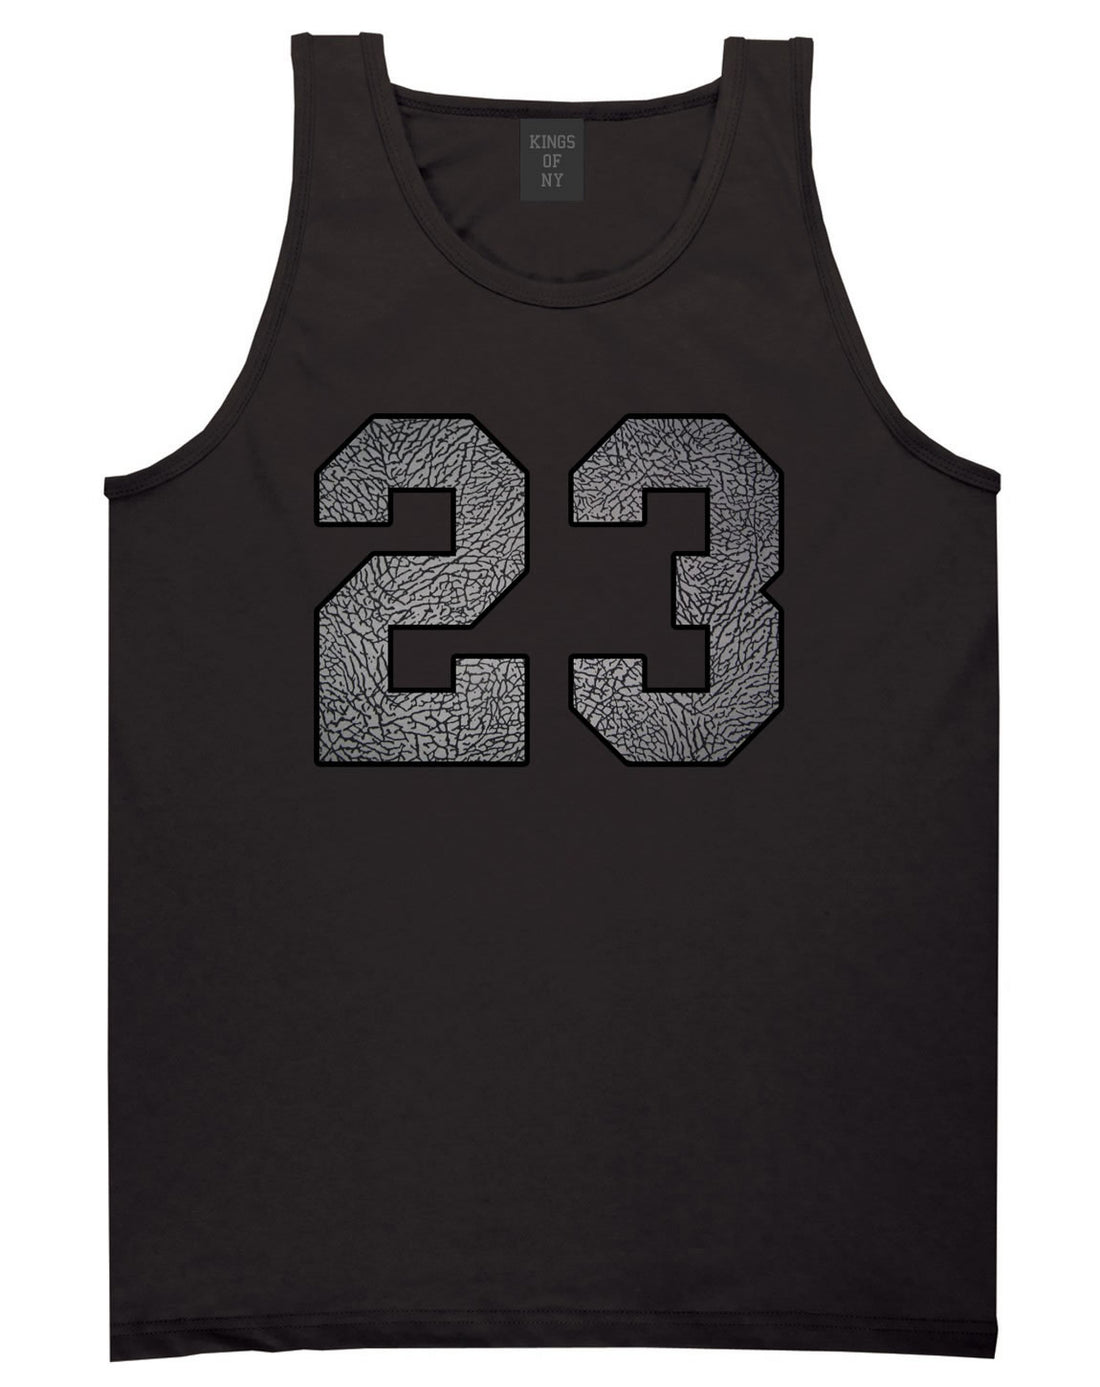 23 Cement Jersey Tank Top in Black By Kings Of NY